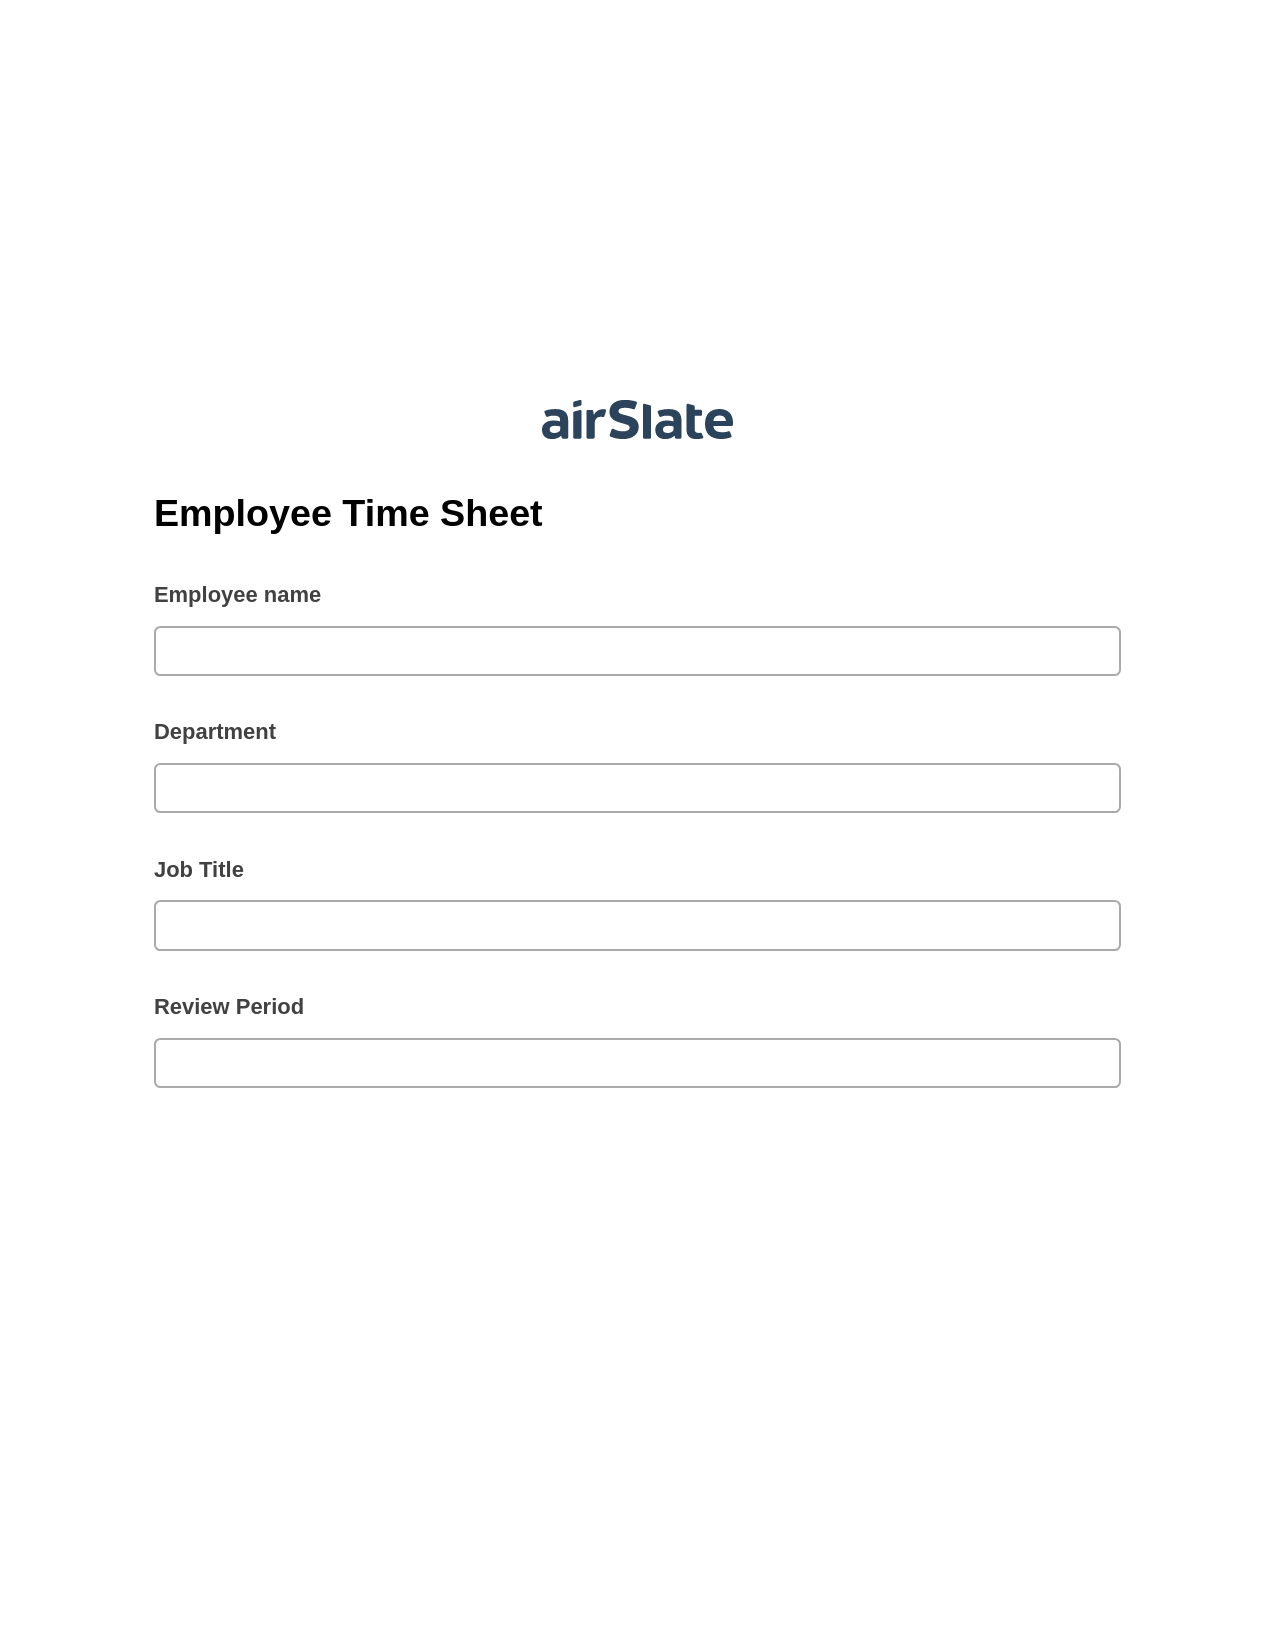 Employee Time Sheet Pre-fill from Smartsheet Bot, Update Audit Trail Bot, Archive to Dropbox Bot